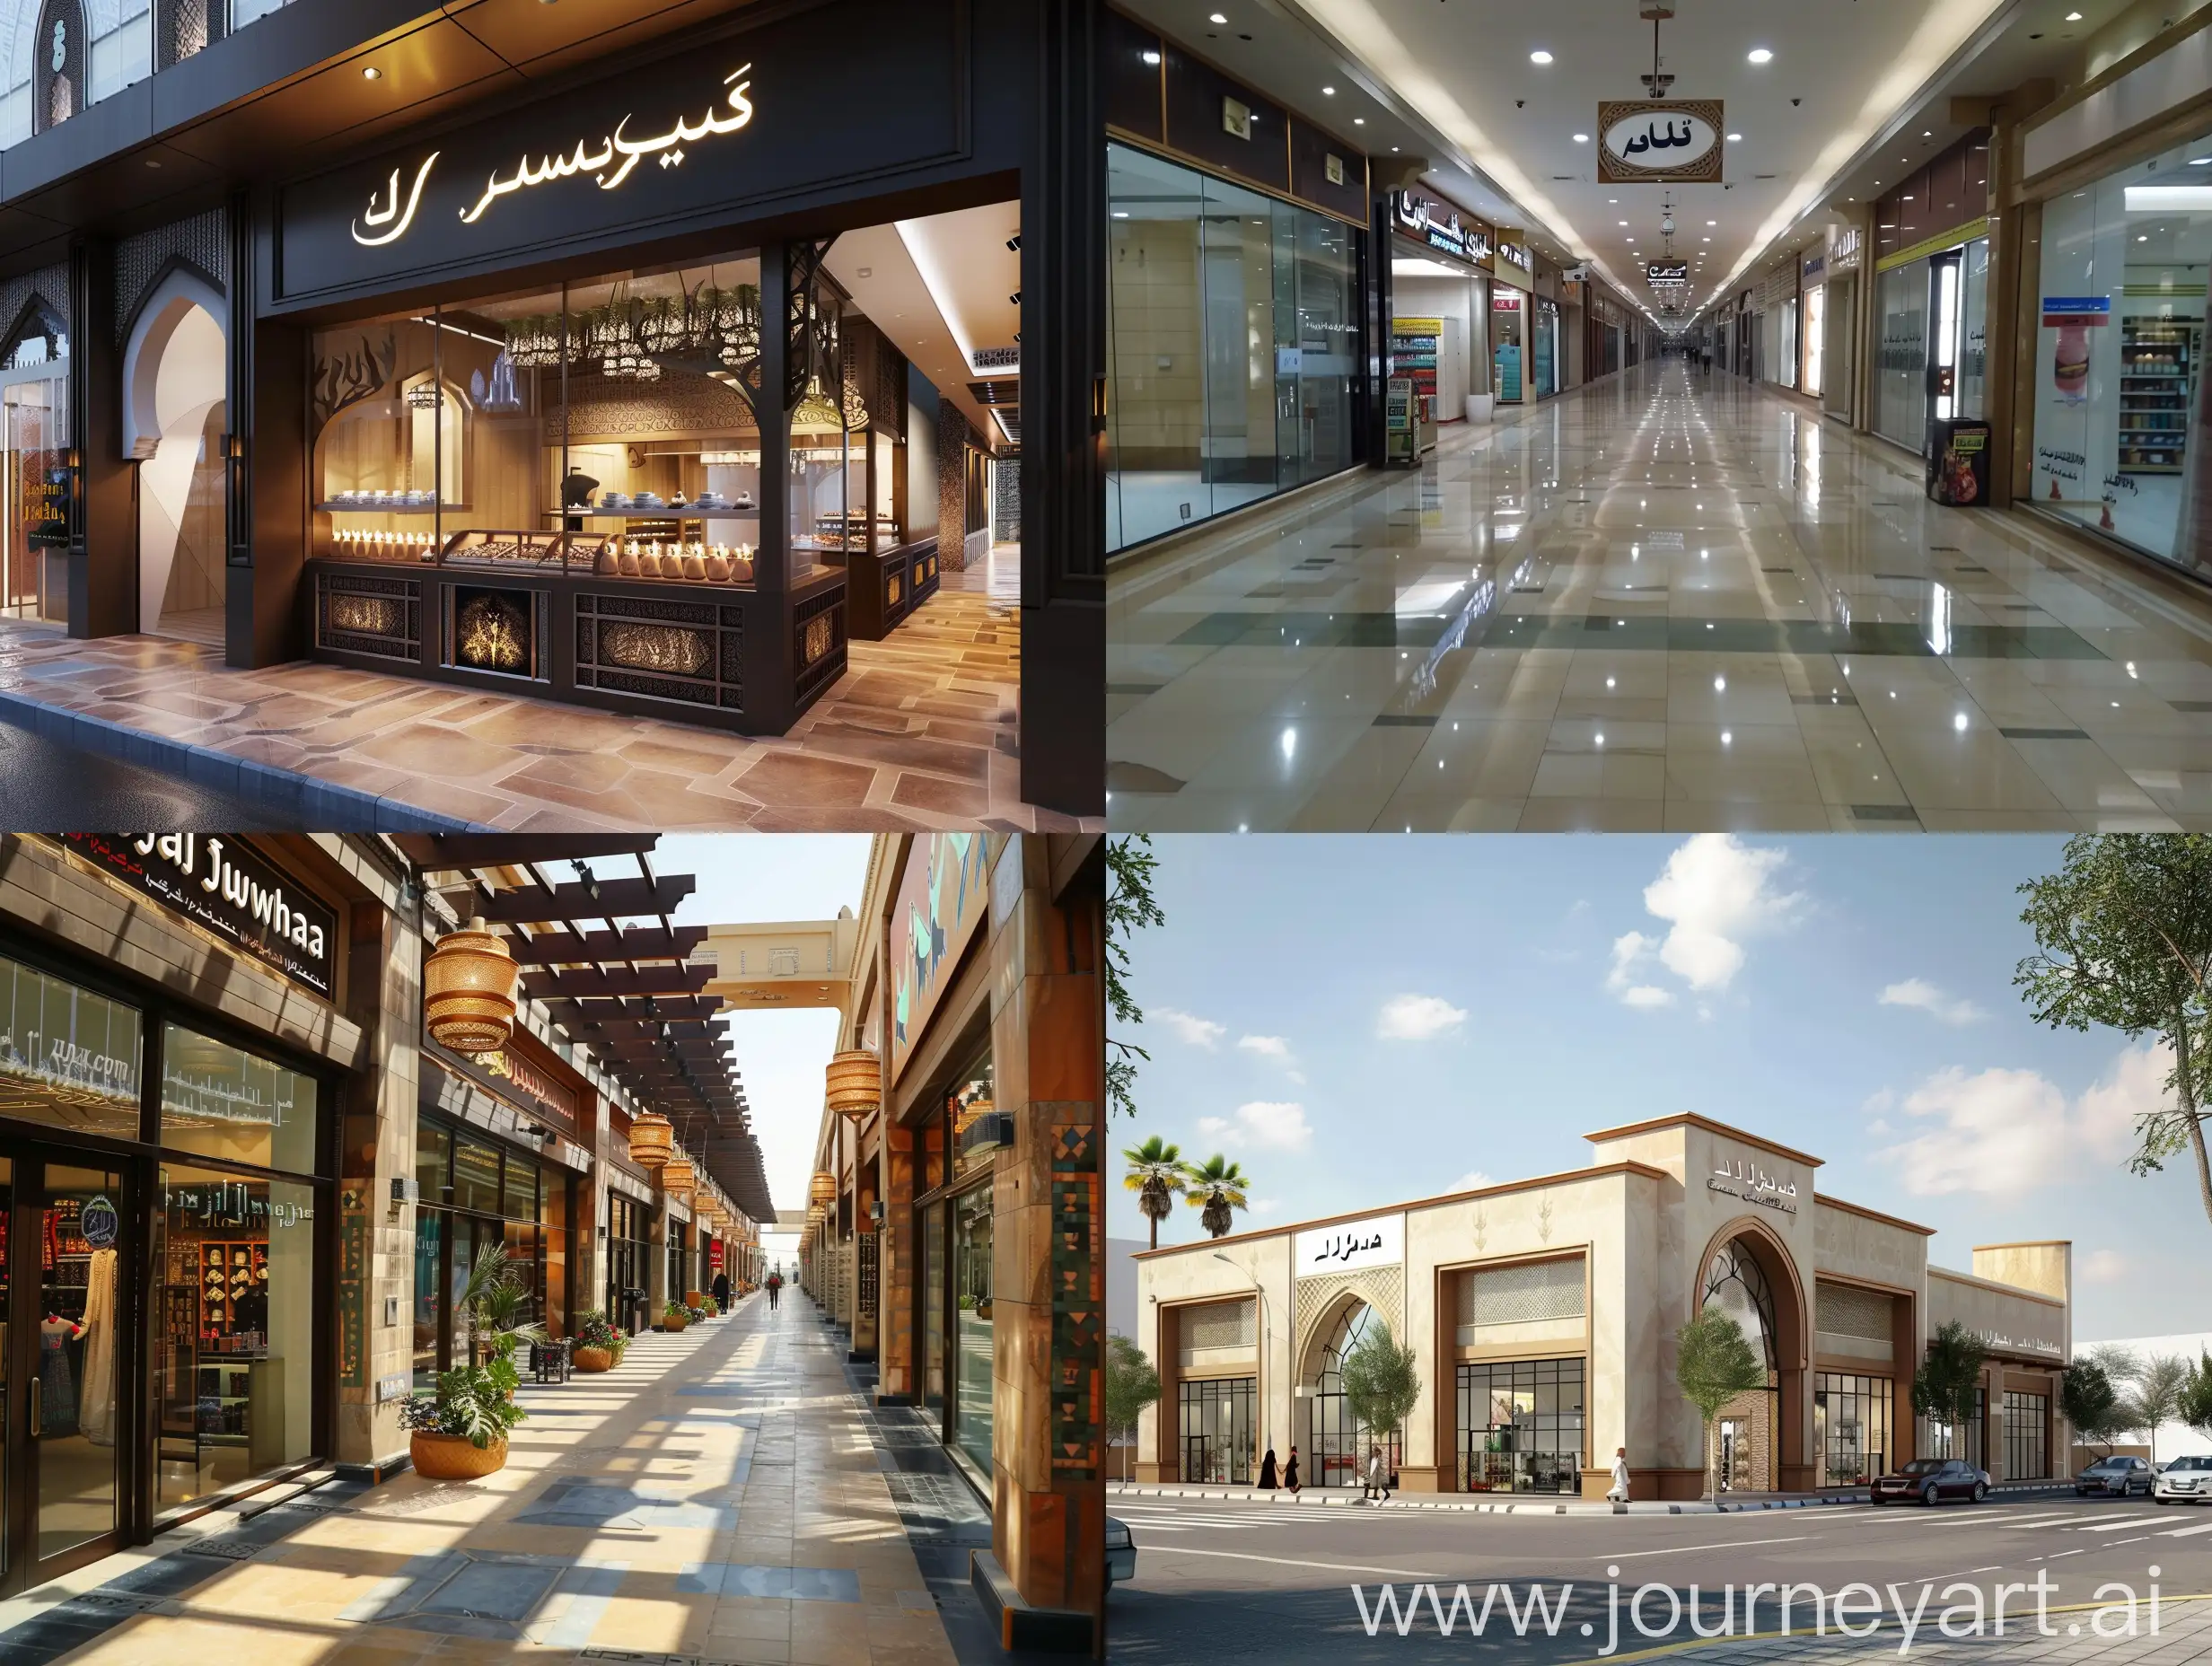 The brand name is Al-Jawhara, a small mall
